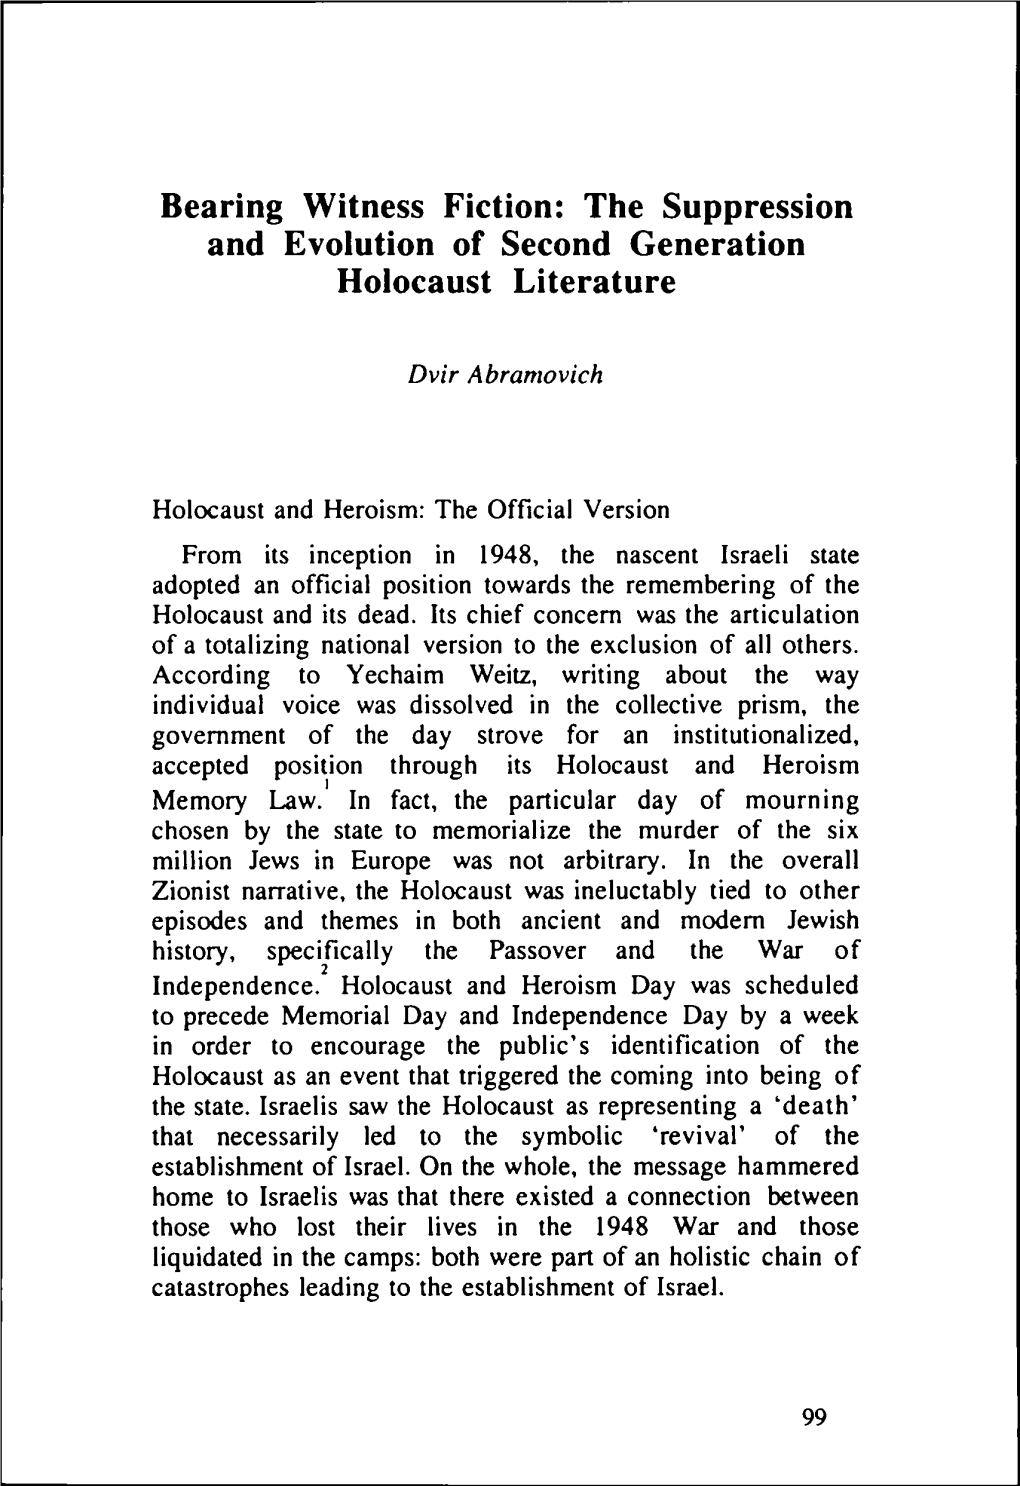 The Suppression and Evolution of Second Generation Holocaust Literature